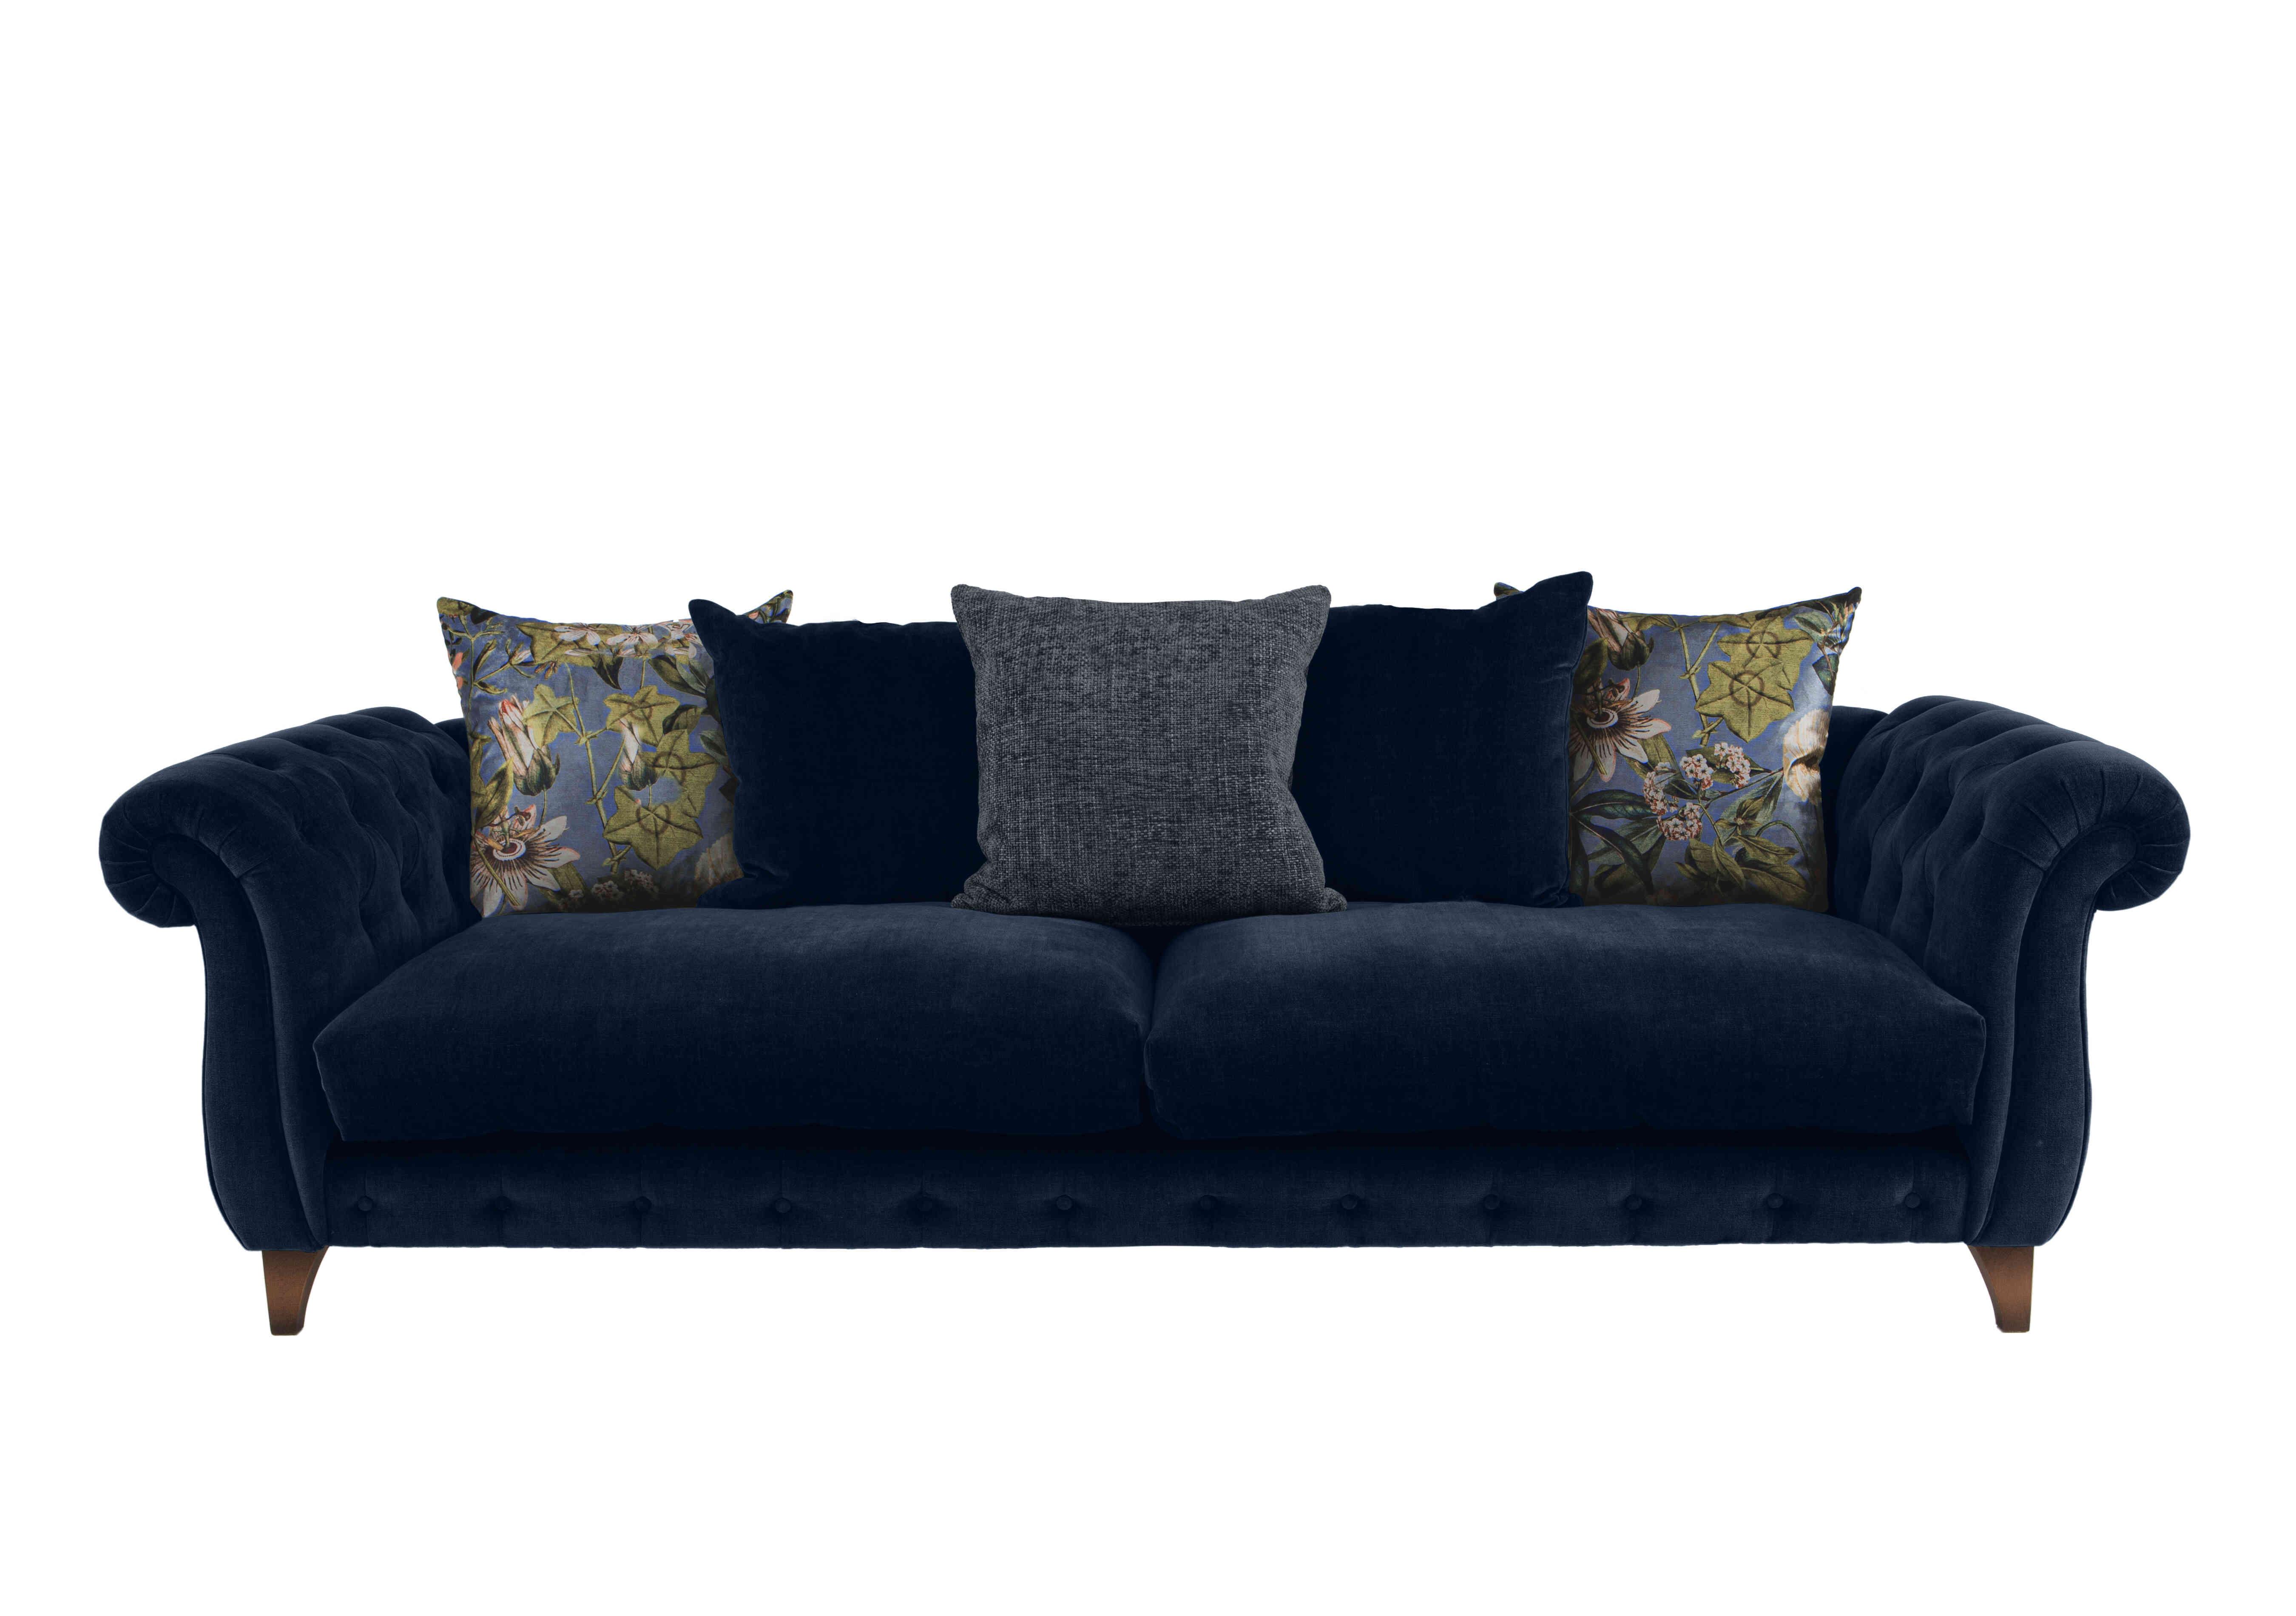 Boutique Palace Fabric 4 Seater Scatter Back Sofa in Oasis Navy on Furniture Village